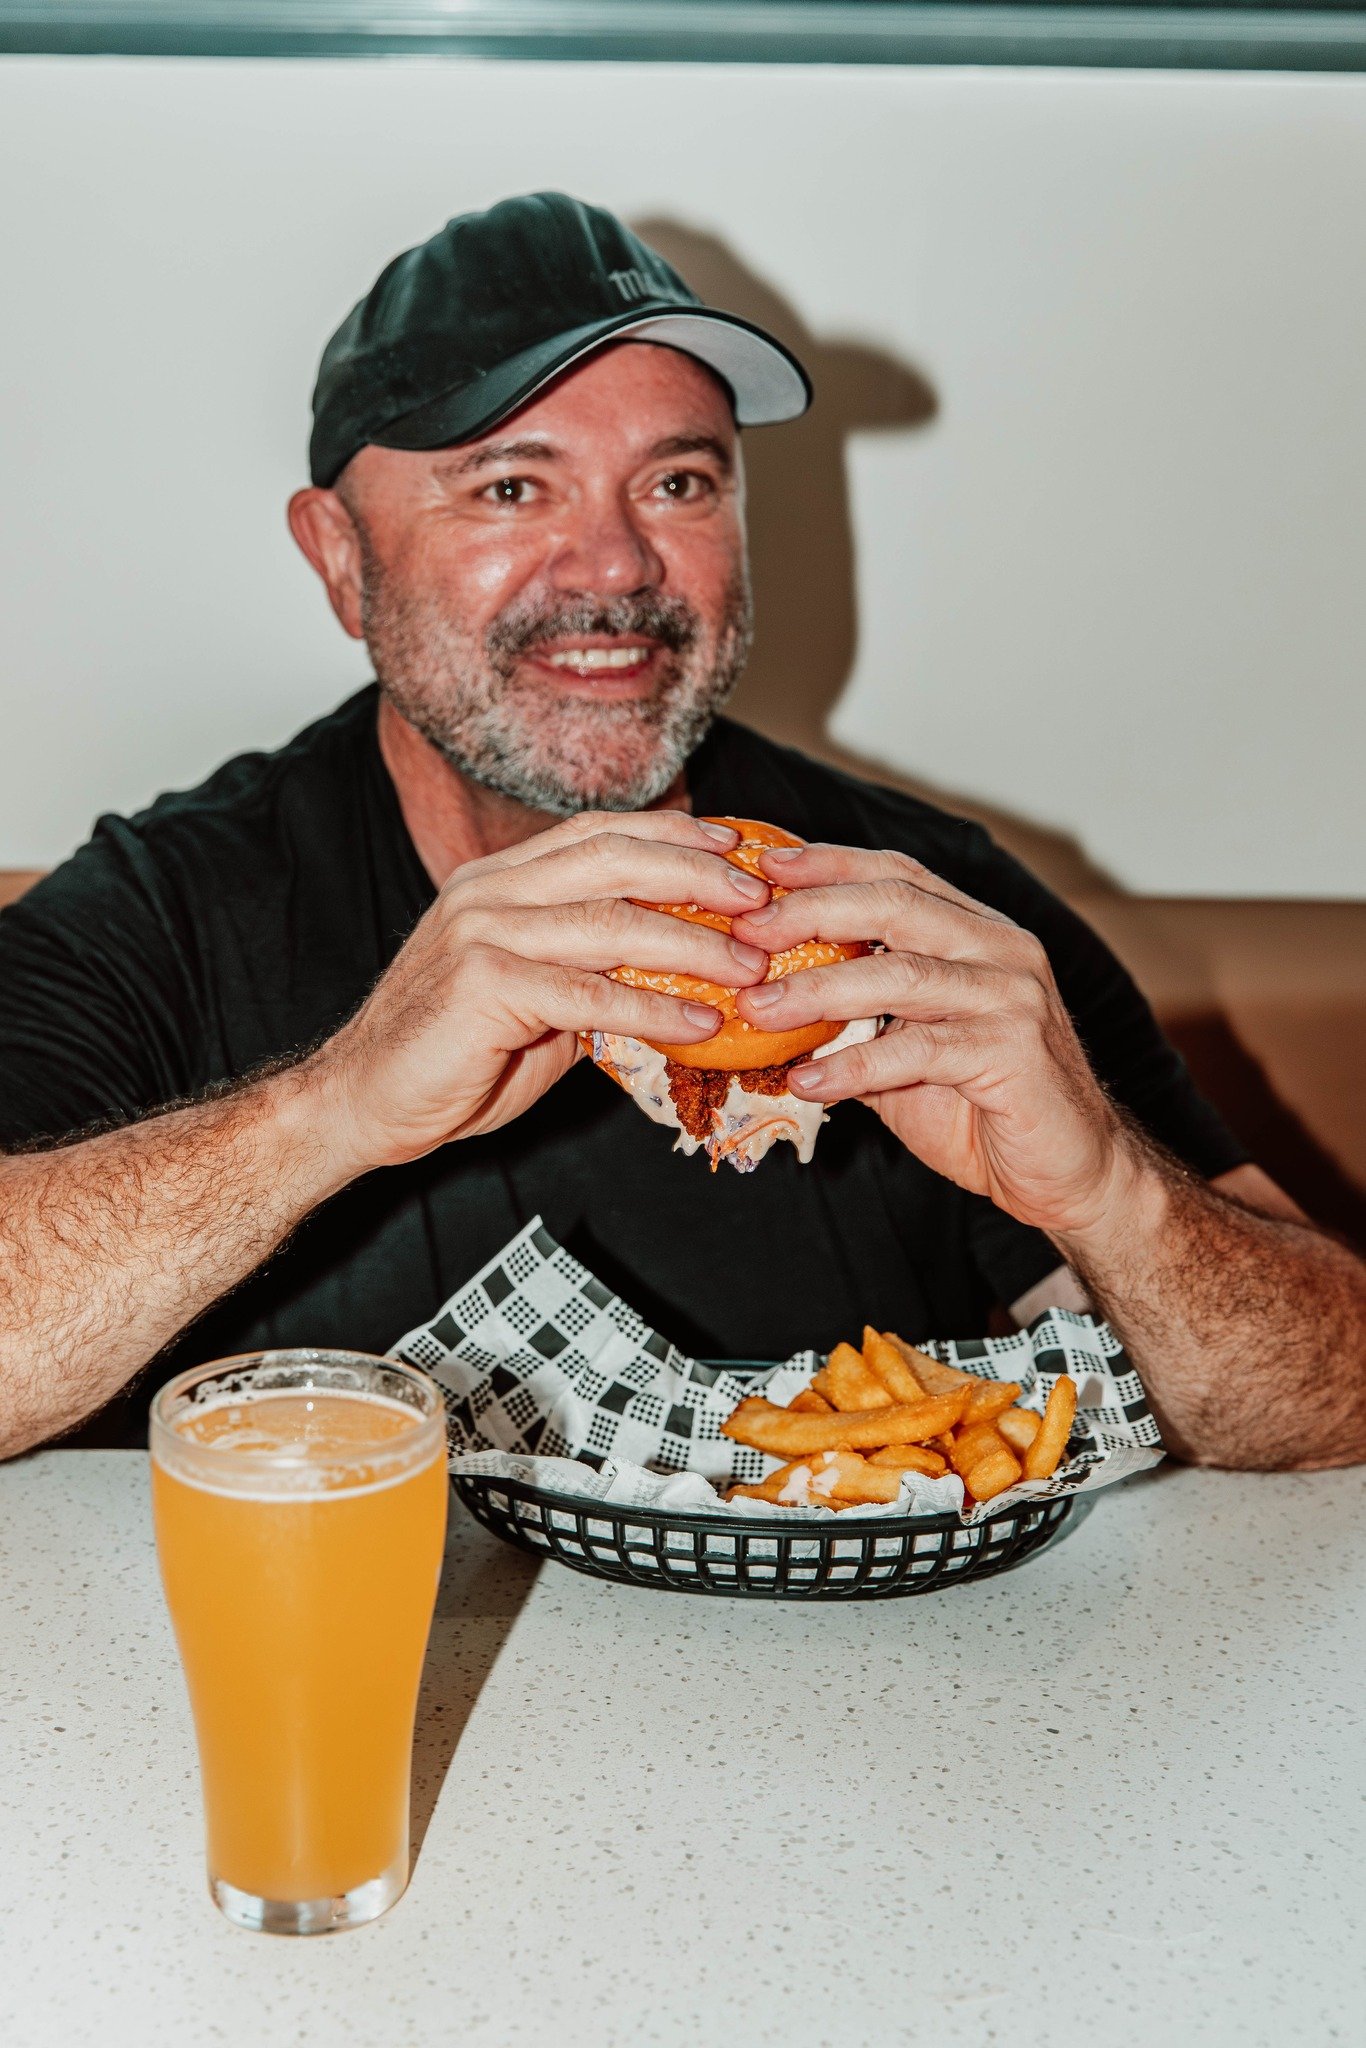 Now this is the perfect way to bring in the weekend. 🔥

There&rsquo;s no better knock-off combo than a burger and a beer! 🍔🍻

Our burgers are some of our most popular menu items. Choose from our stacked line-up including our signature Central Lane